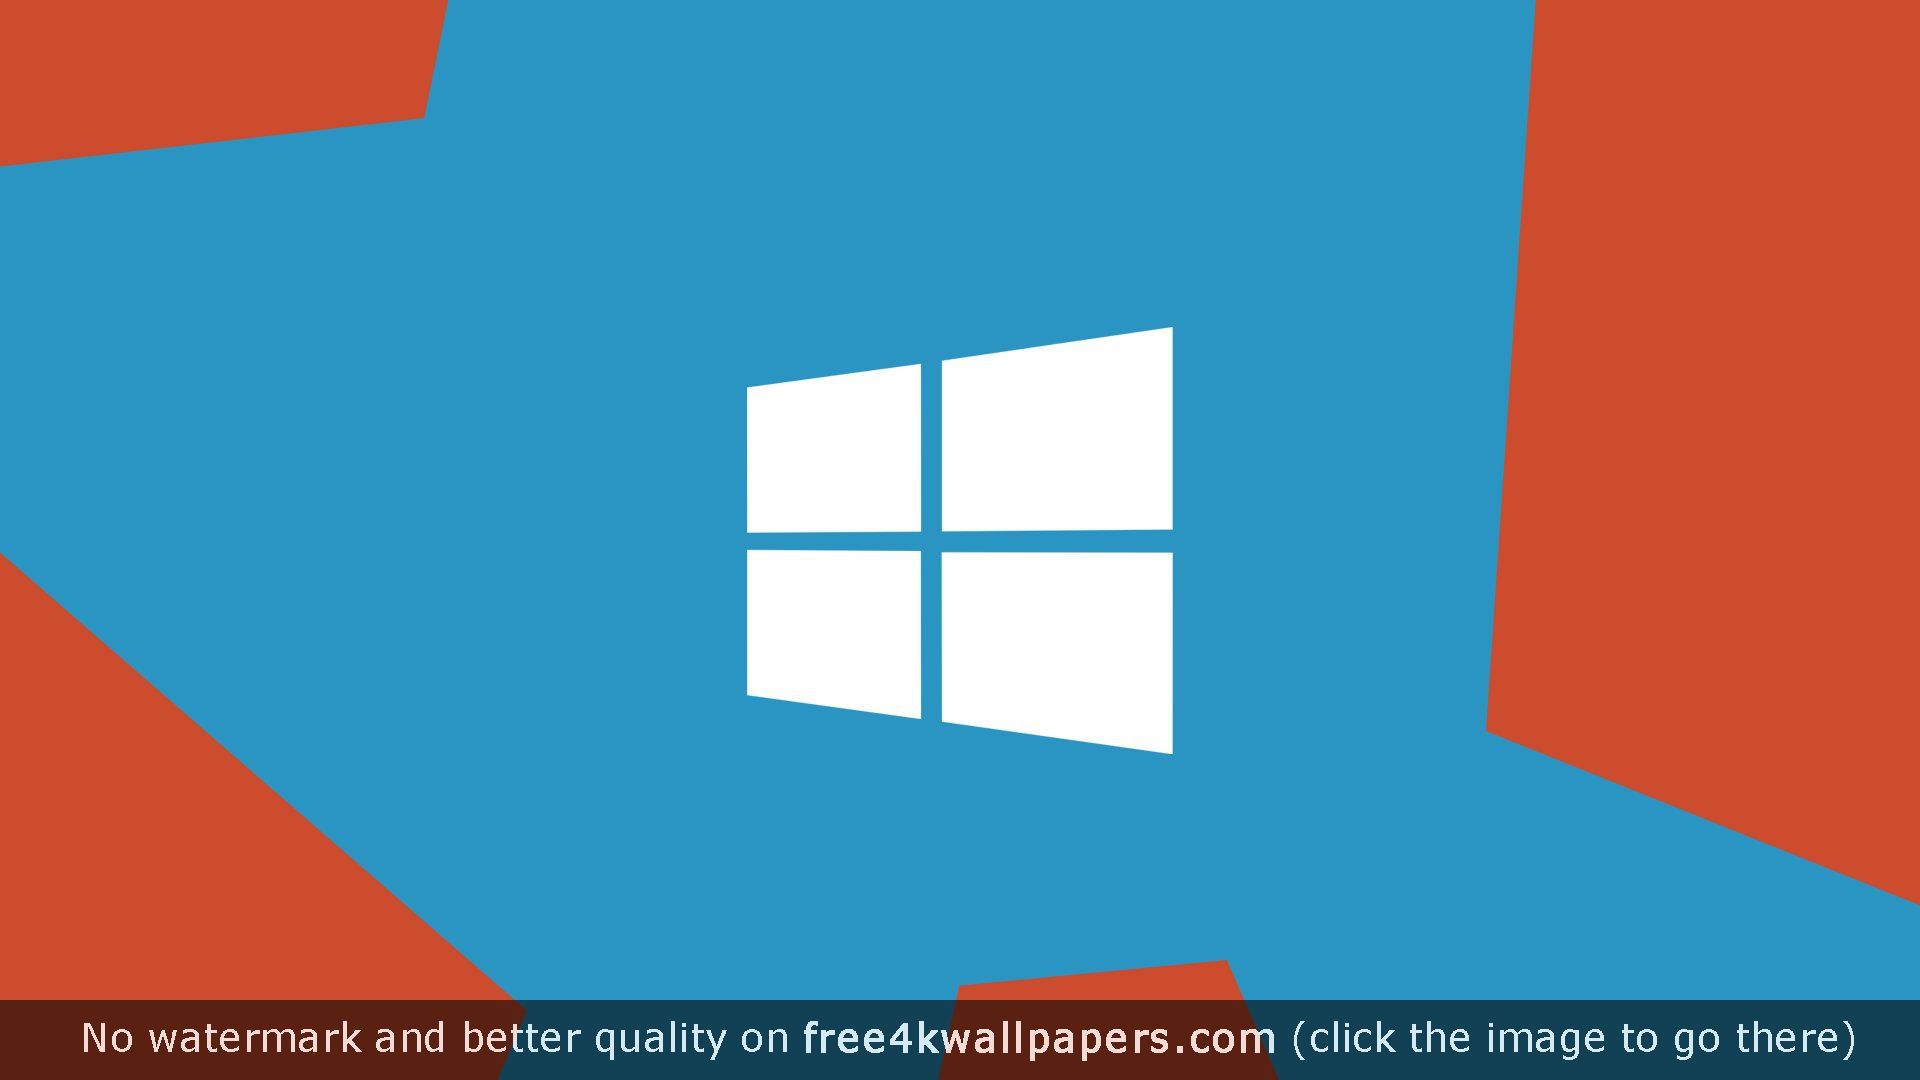 Best Windows Wallpaper For Your Pc Mac Or Mobile Device